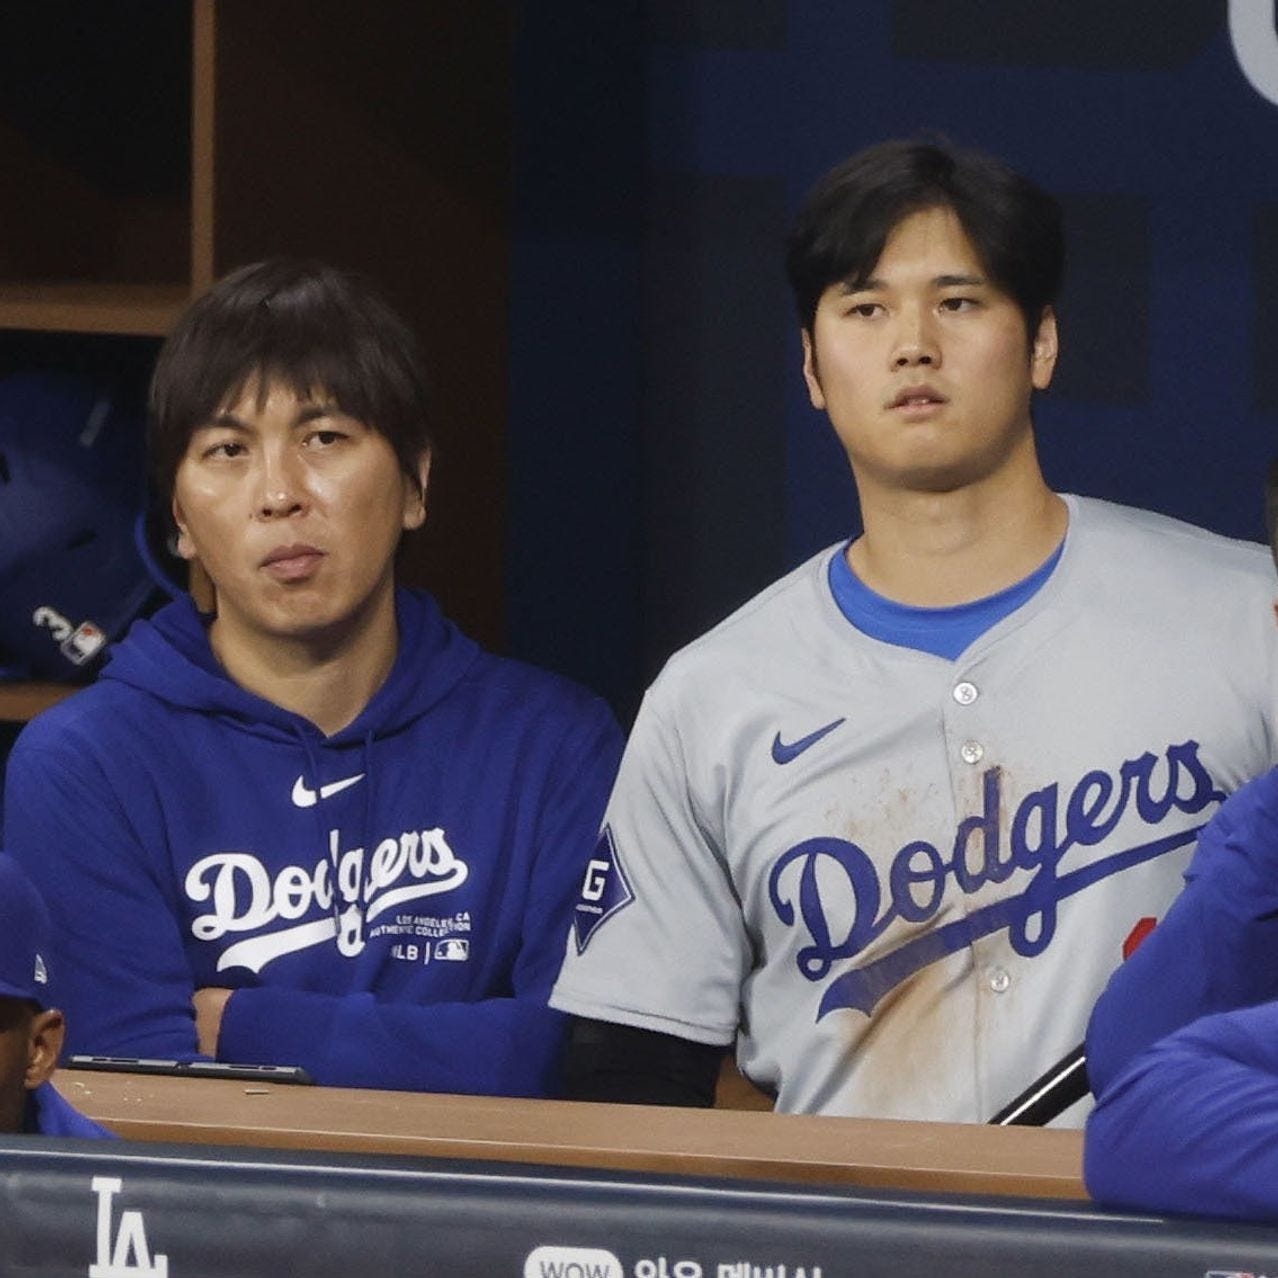 The Interpreter at the Center of the Shohei Ohtani Scandal - WSJ